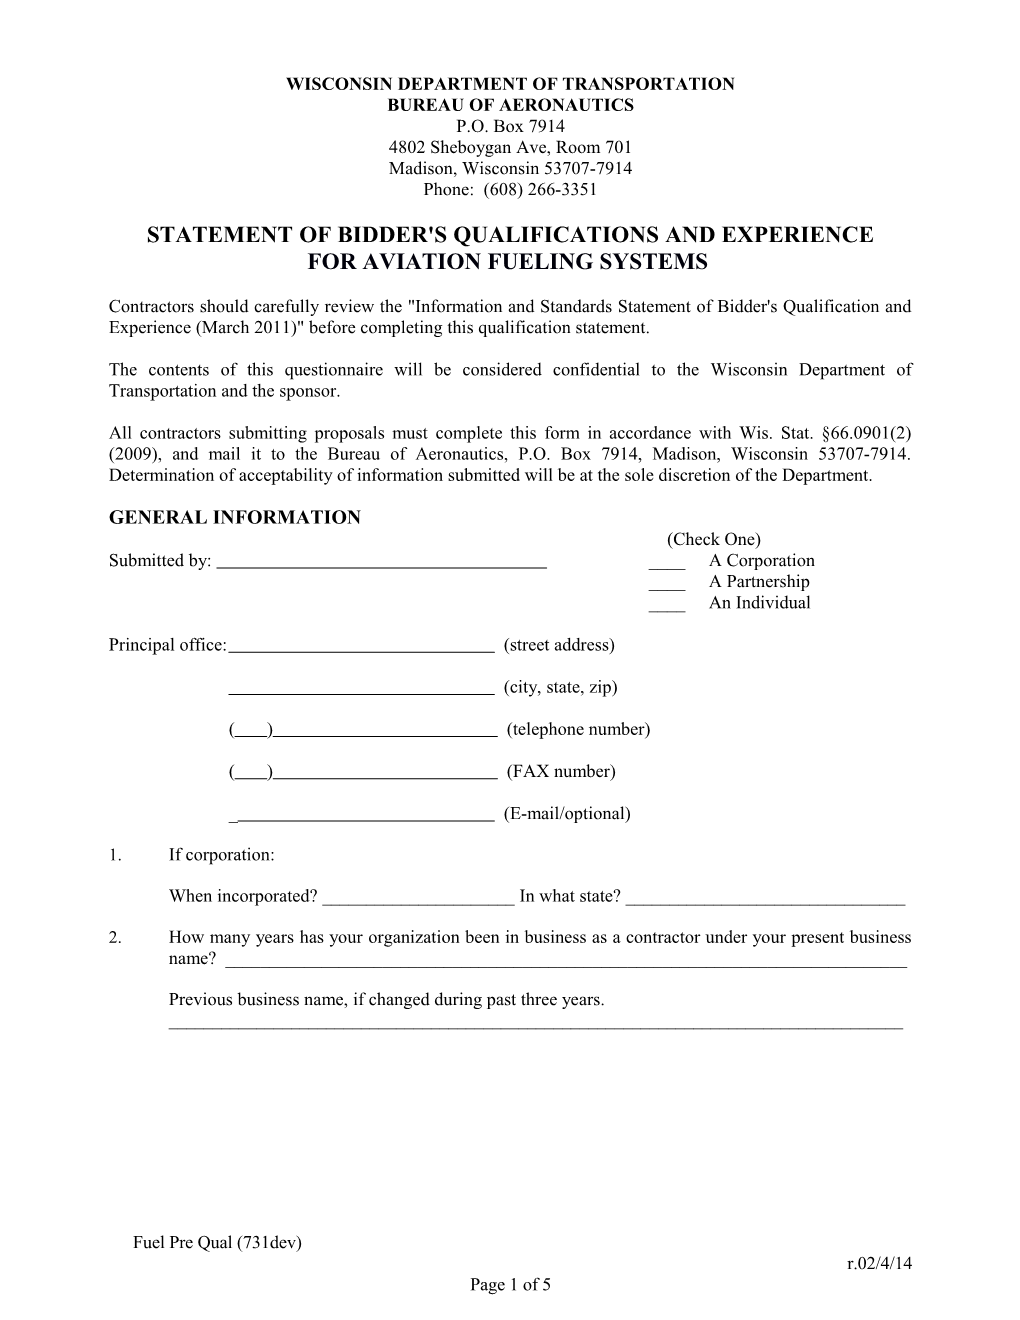 Statement of Bidder's Qualifications and Experiencefor Aviation Fueling Systems